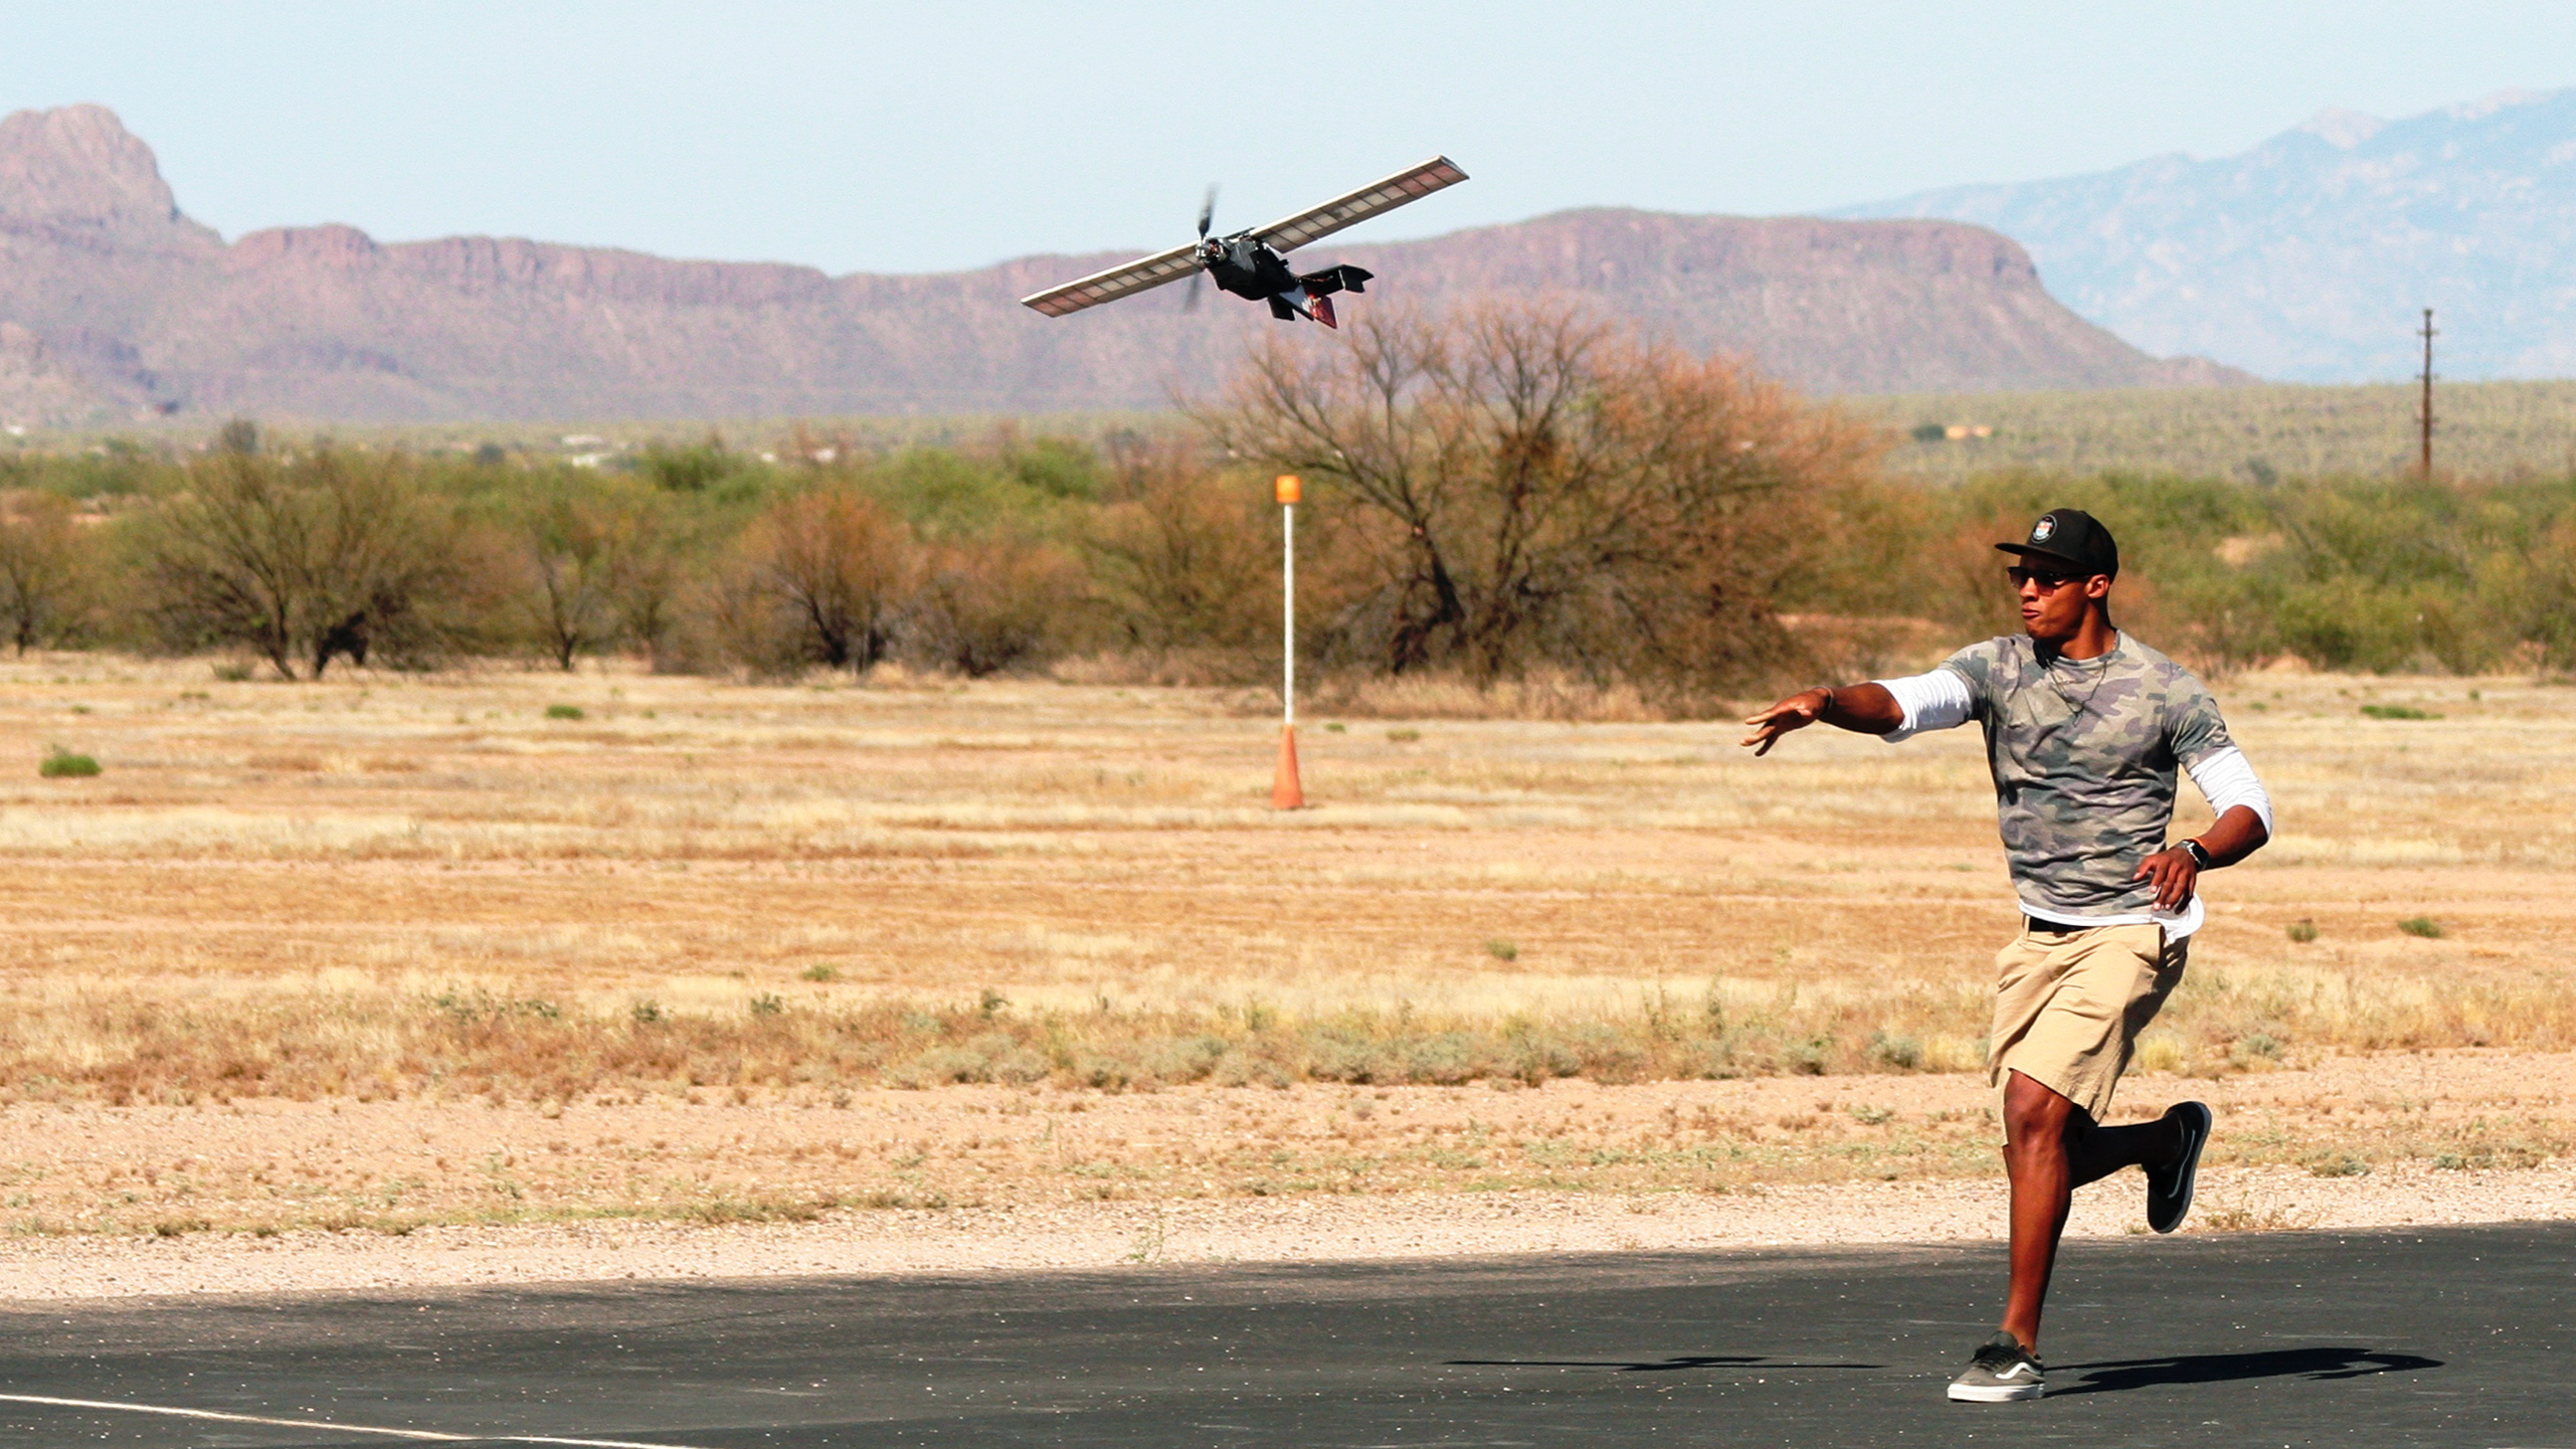 Former University of Tennessee quarterback Joshua Dobbs gives his team's model aircraft a running start in the Design/Build/Fly American Institute of Aeronautics and Astronautics (AIAA) competition in Tucson, Arizona. Photo courtesy of David Reynolds.